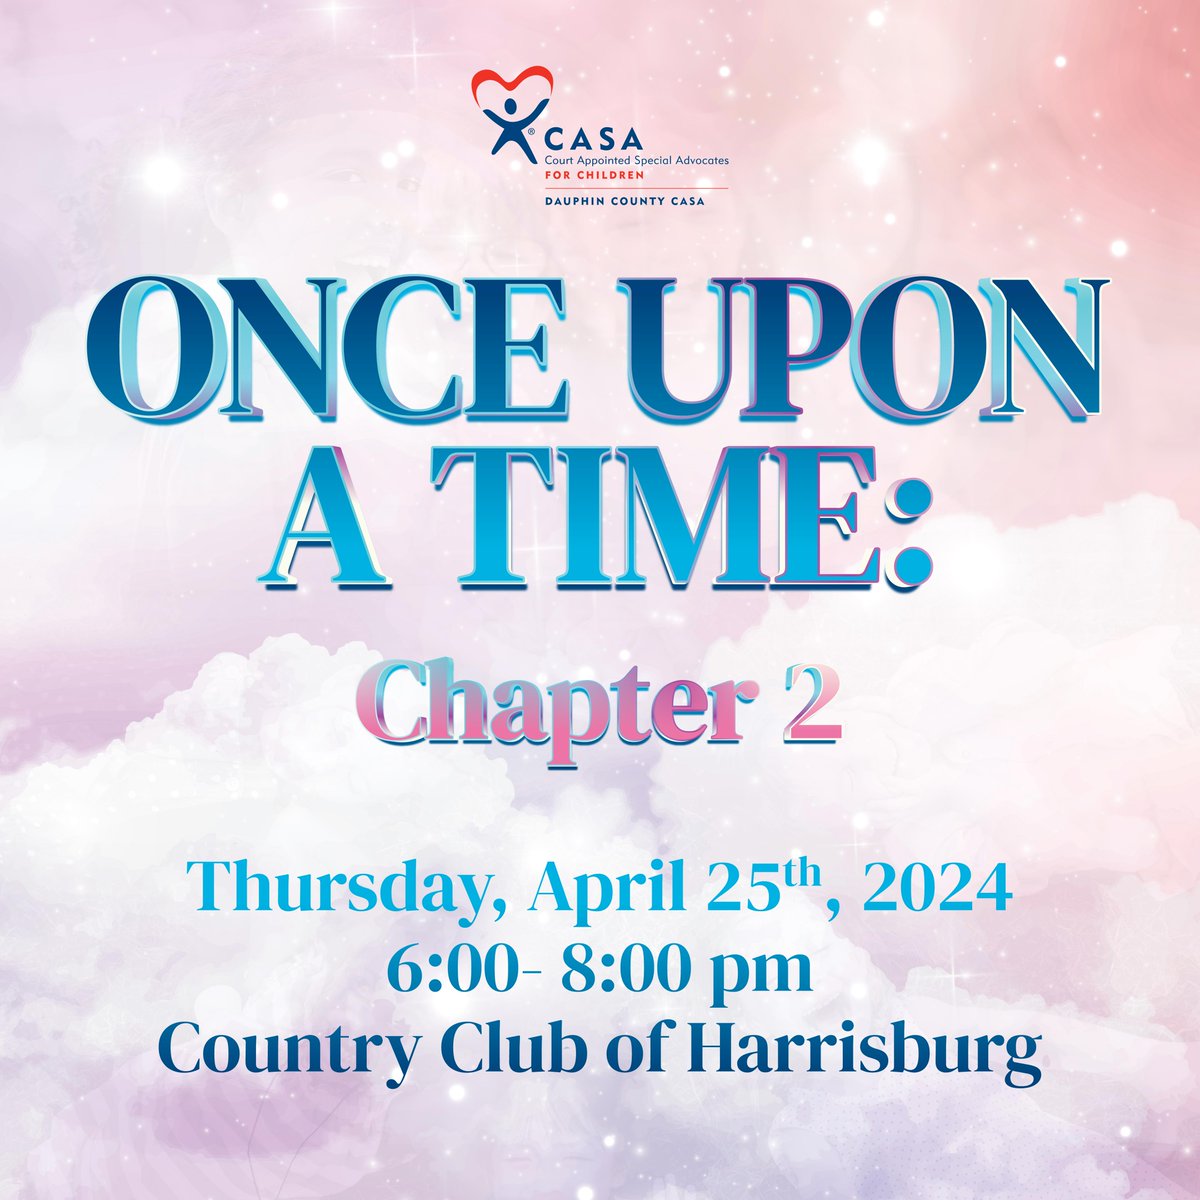 Only ten days to go until Once Upon A Time: Chapter 2! 📖 ✨ Purchase your tickets by Saturday, April 20th: dauphincountycasa.org/event/once-upo…